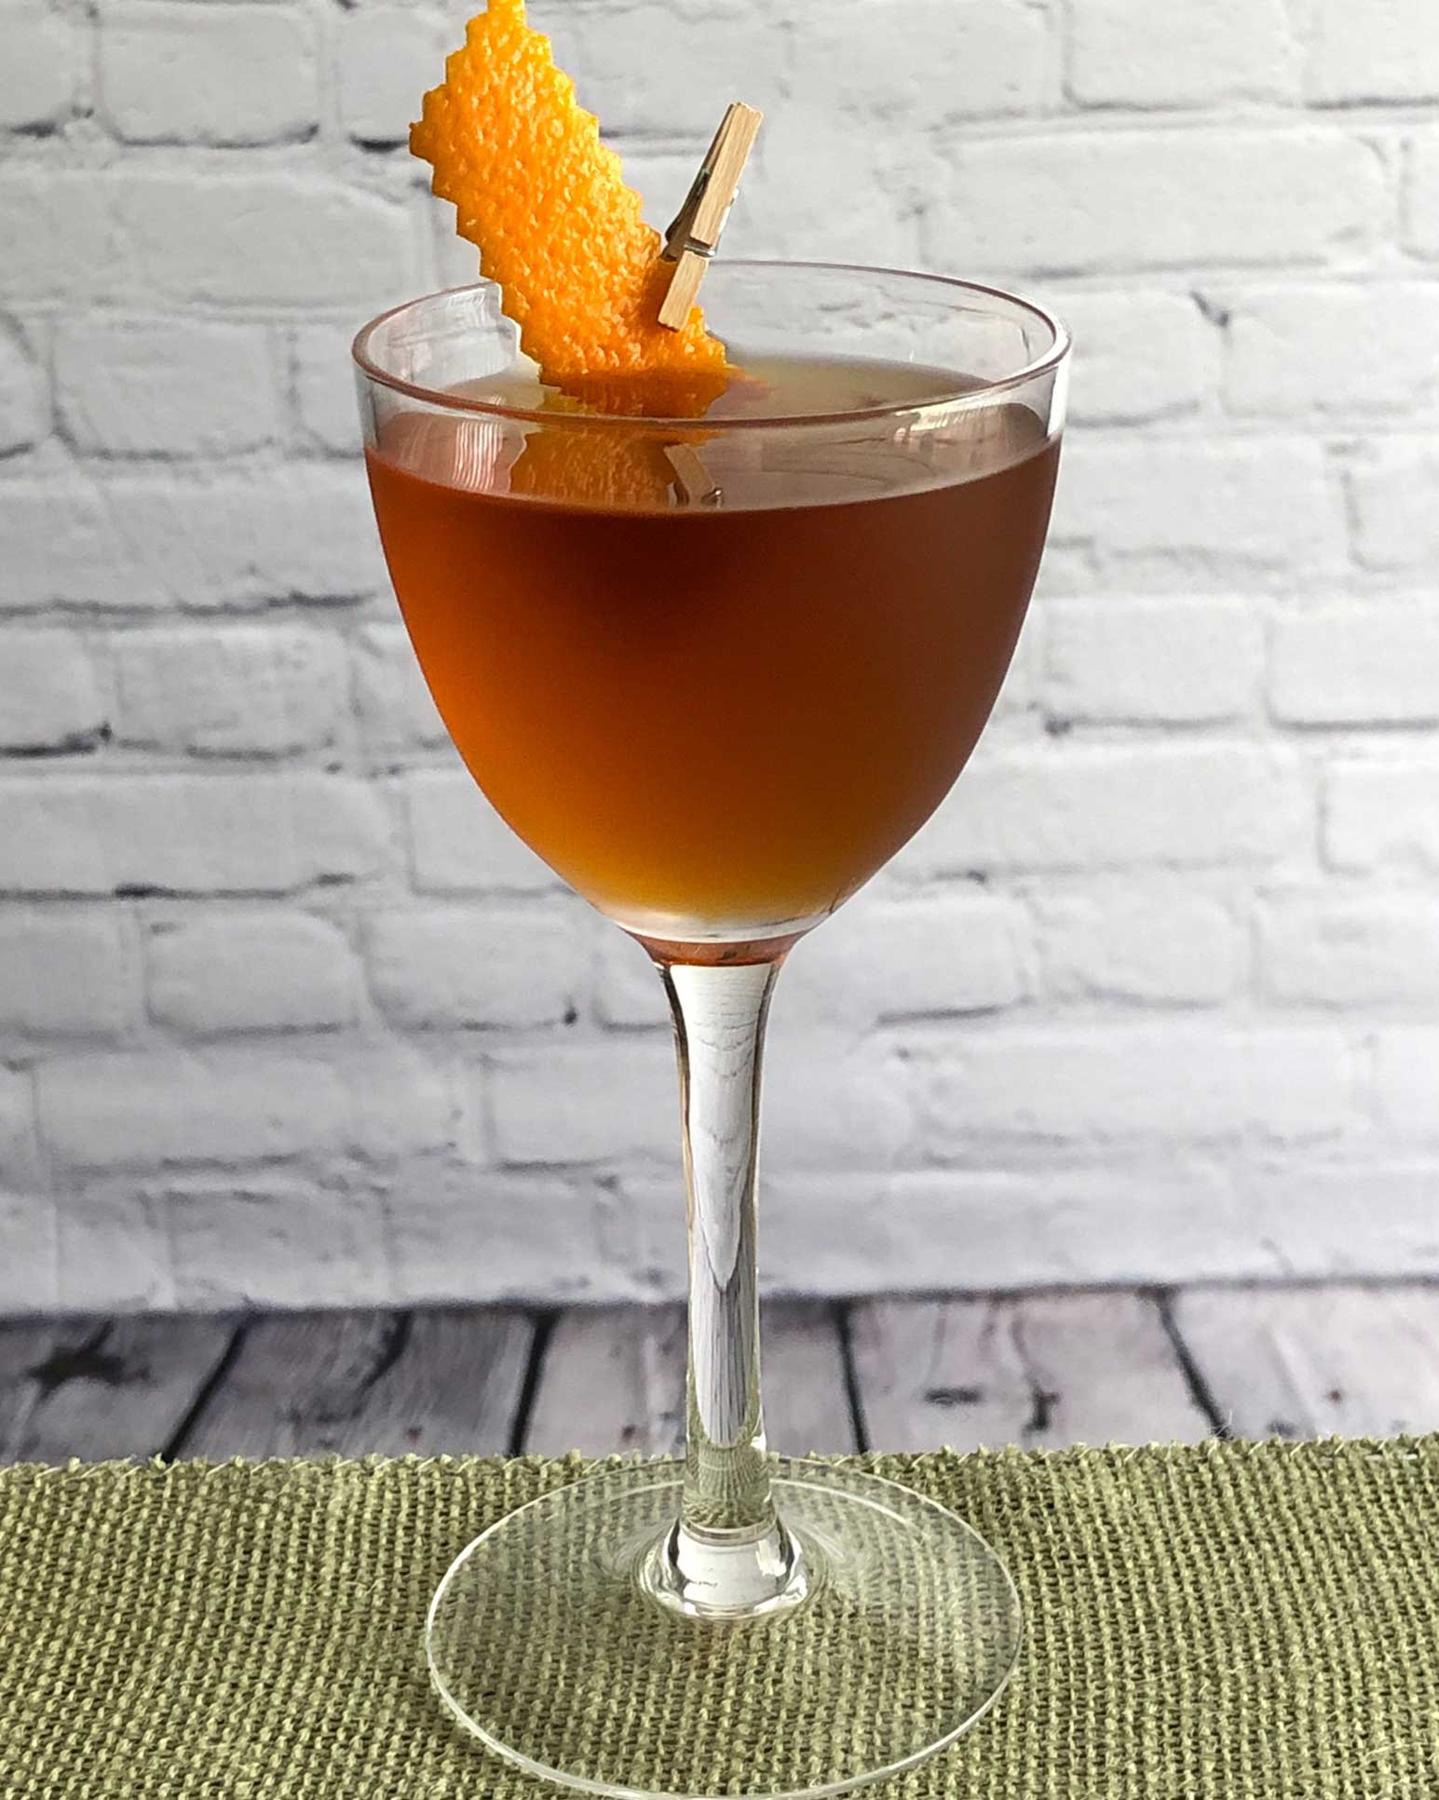 An example of the Hackensack, the mixed drink (drink), by based on the Newark, PDT, New York City, featuring apple brandy, Cocchi Vermouth di Torino ‘Storico’, maraschino liqueur, Elisir Novasalus, kosher salt, and orange twist; photo by Lee Edwards